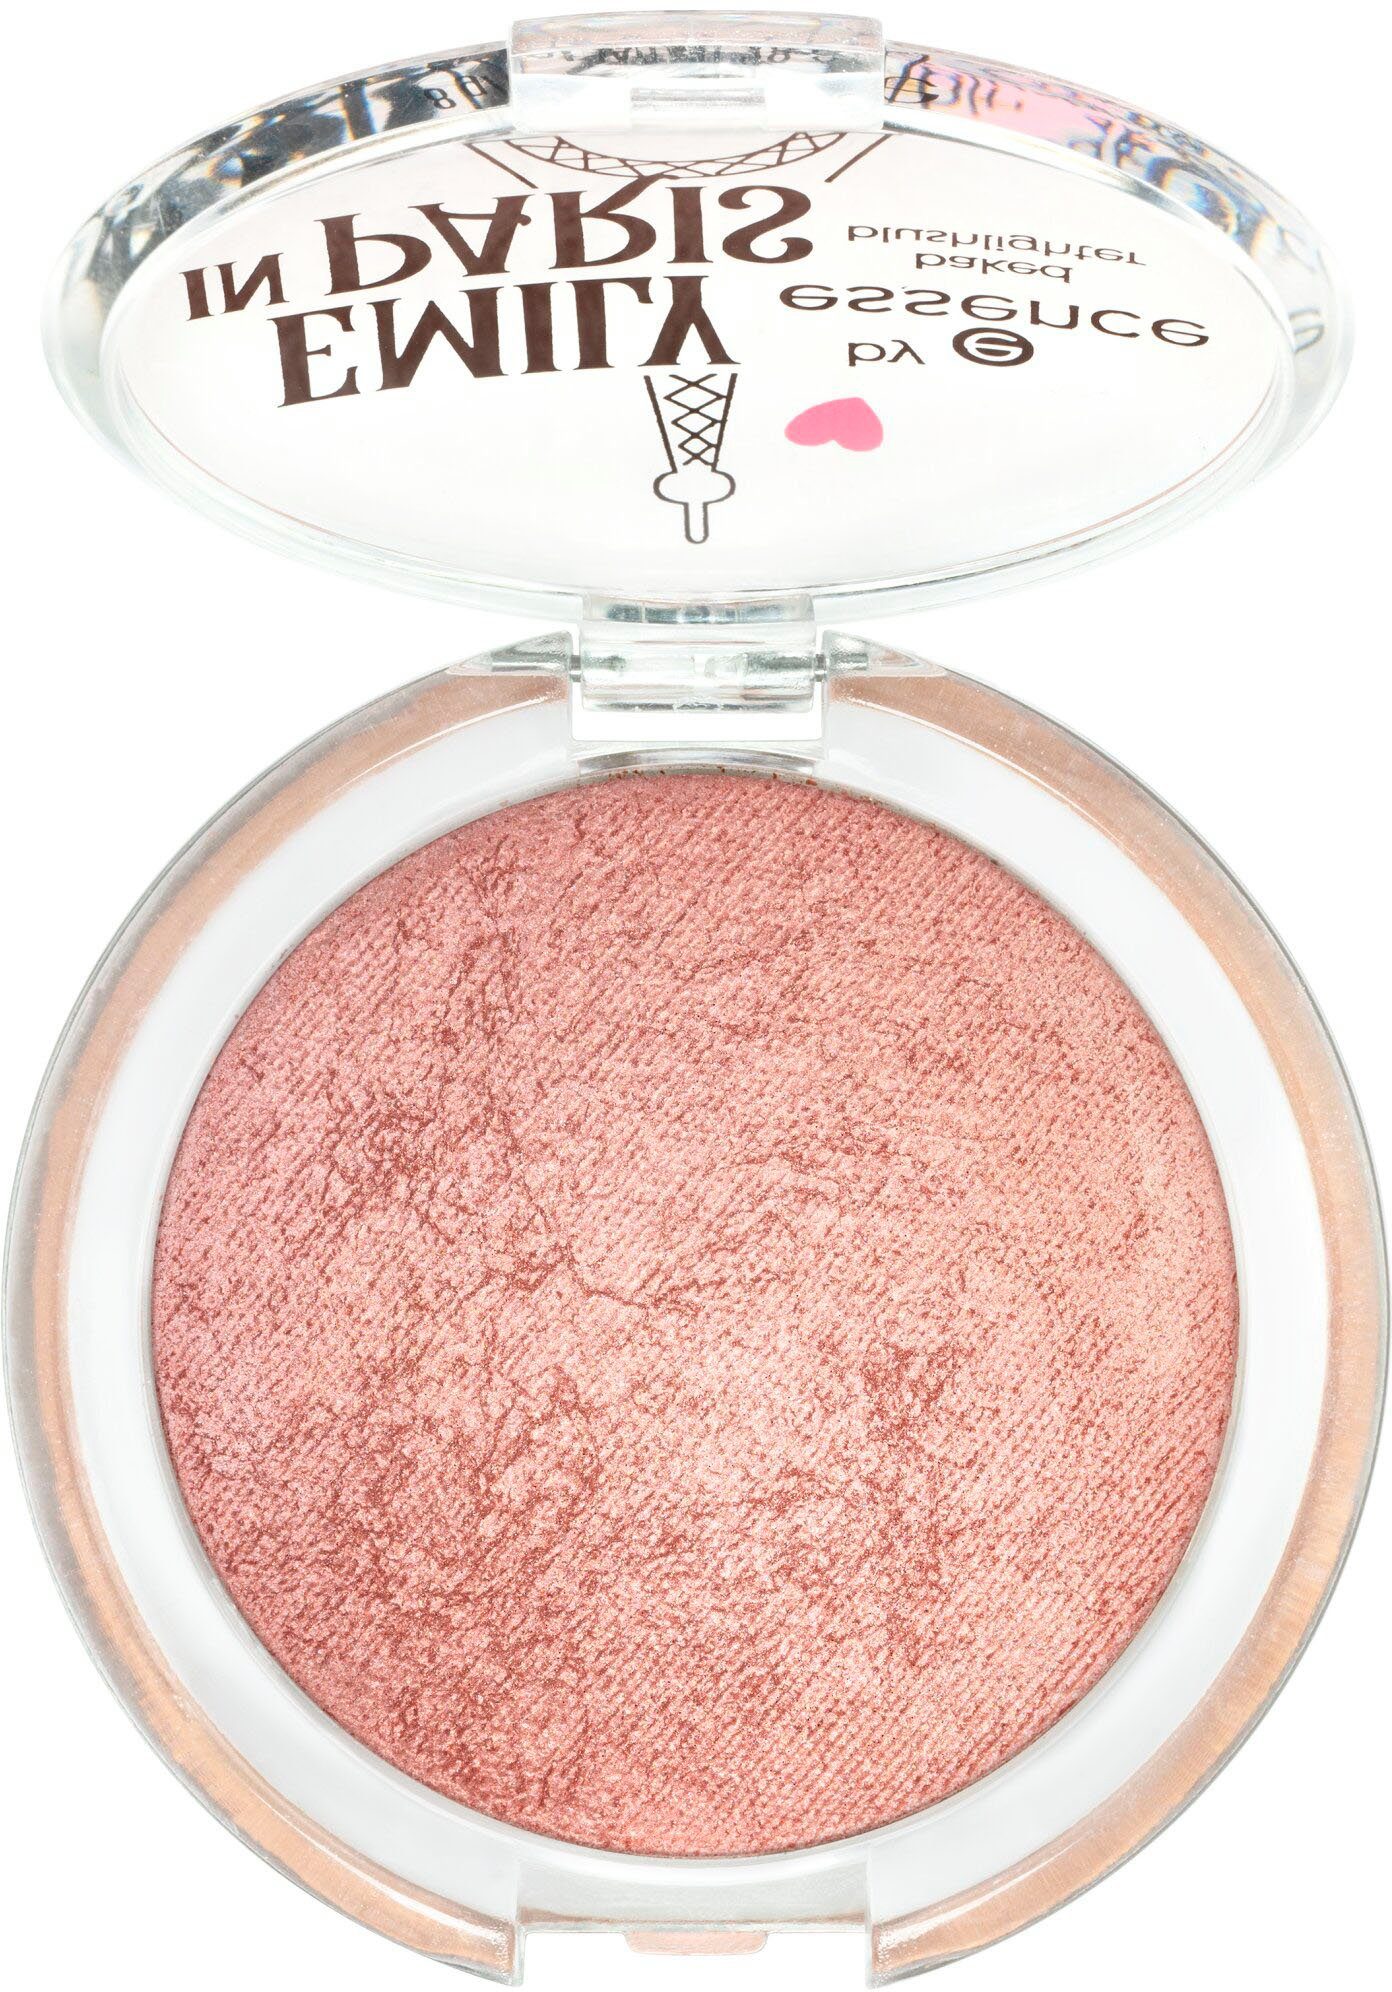 EMILY baked essence Rouge PARIS by IN blushlighter Essence